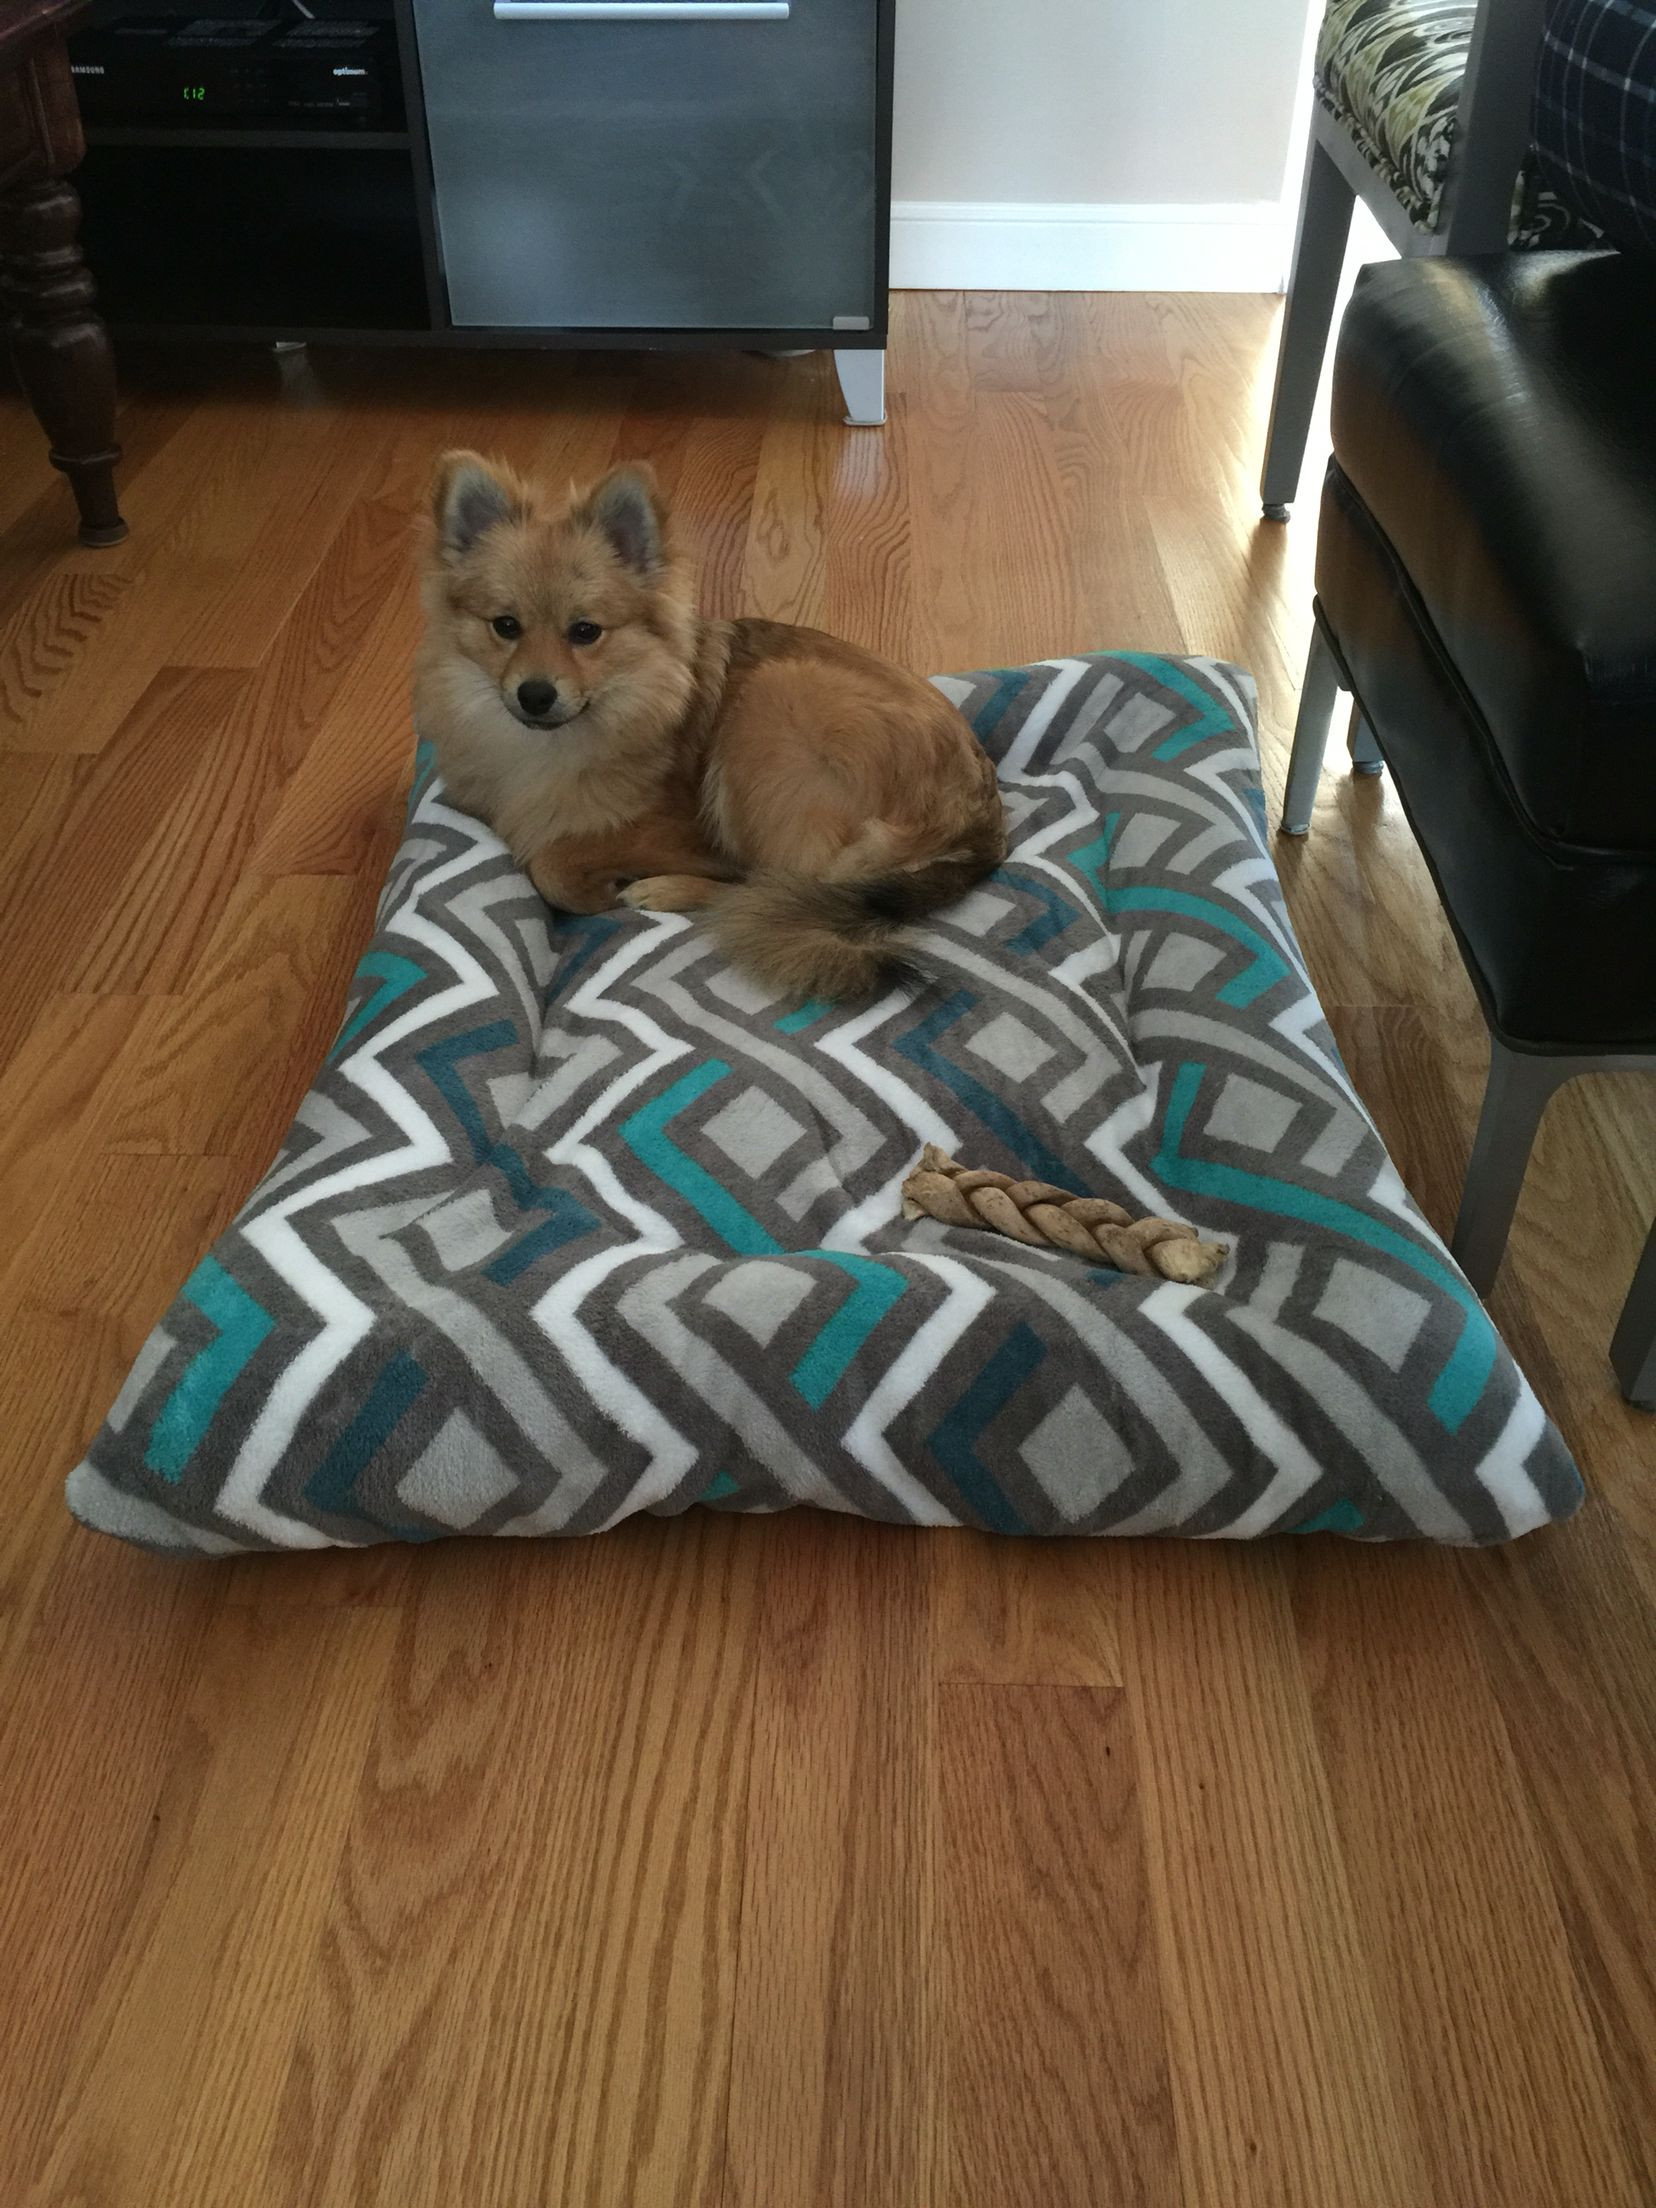 DIY Dog Bed Pillow
 Diy dog bed with old pillows and $5 Walmart blanket